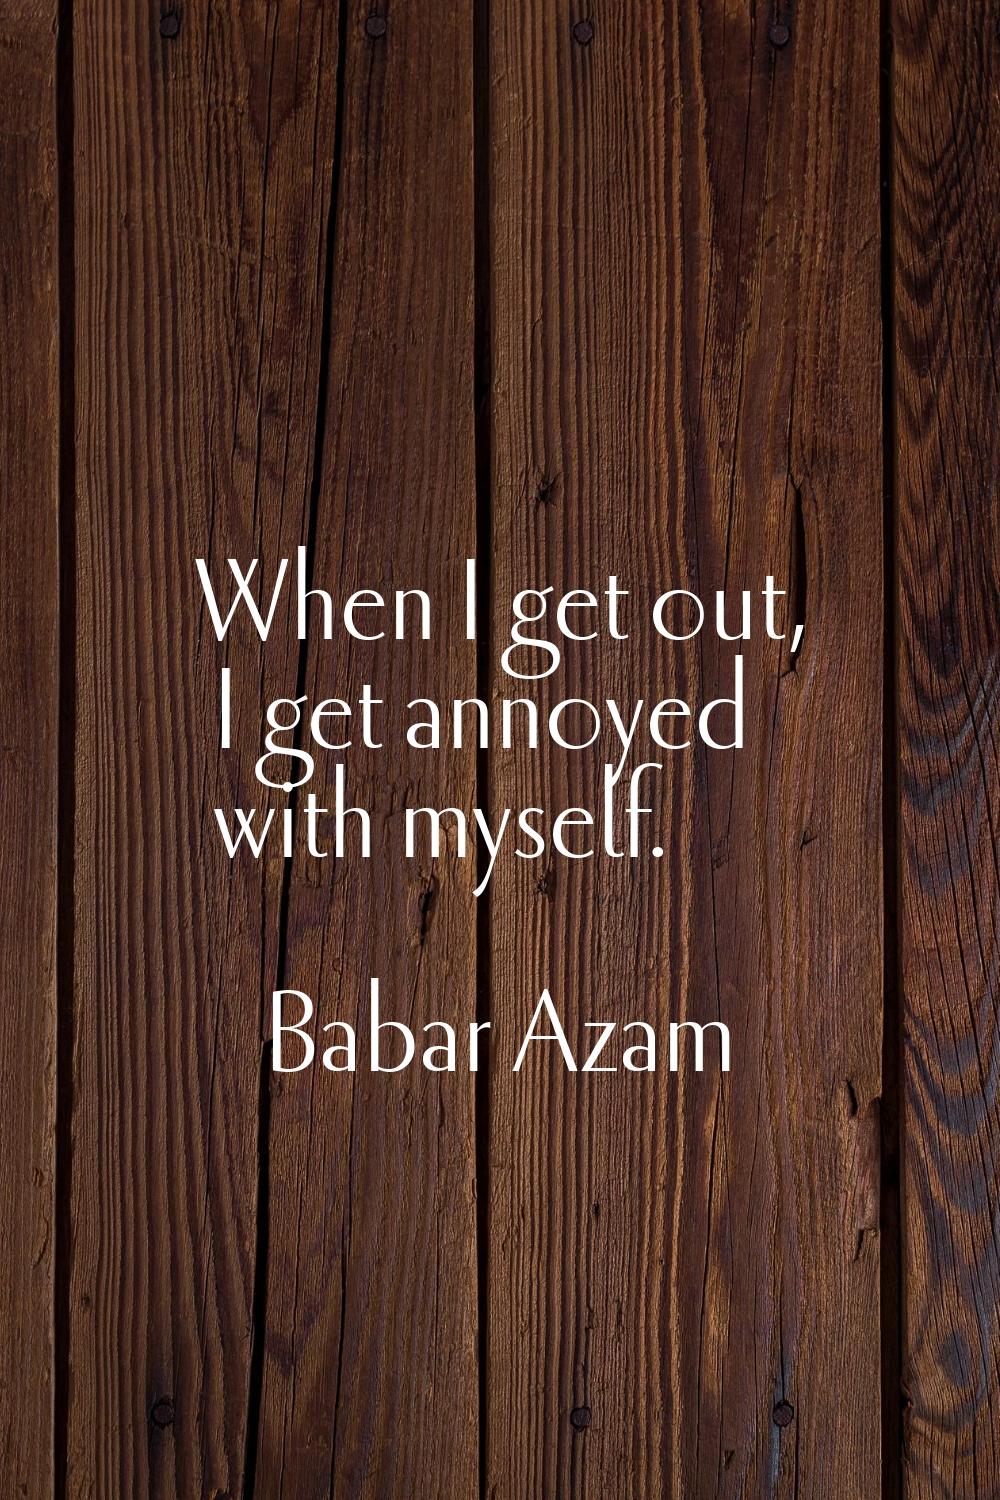 When I get out, I get annoyed with myself.